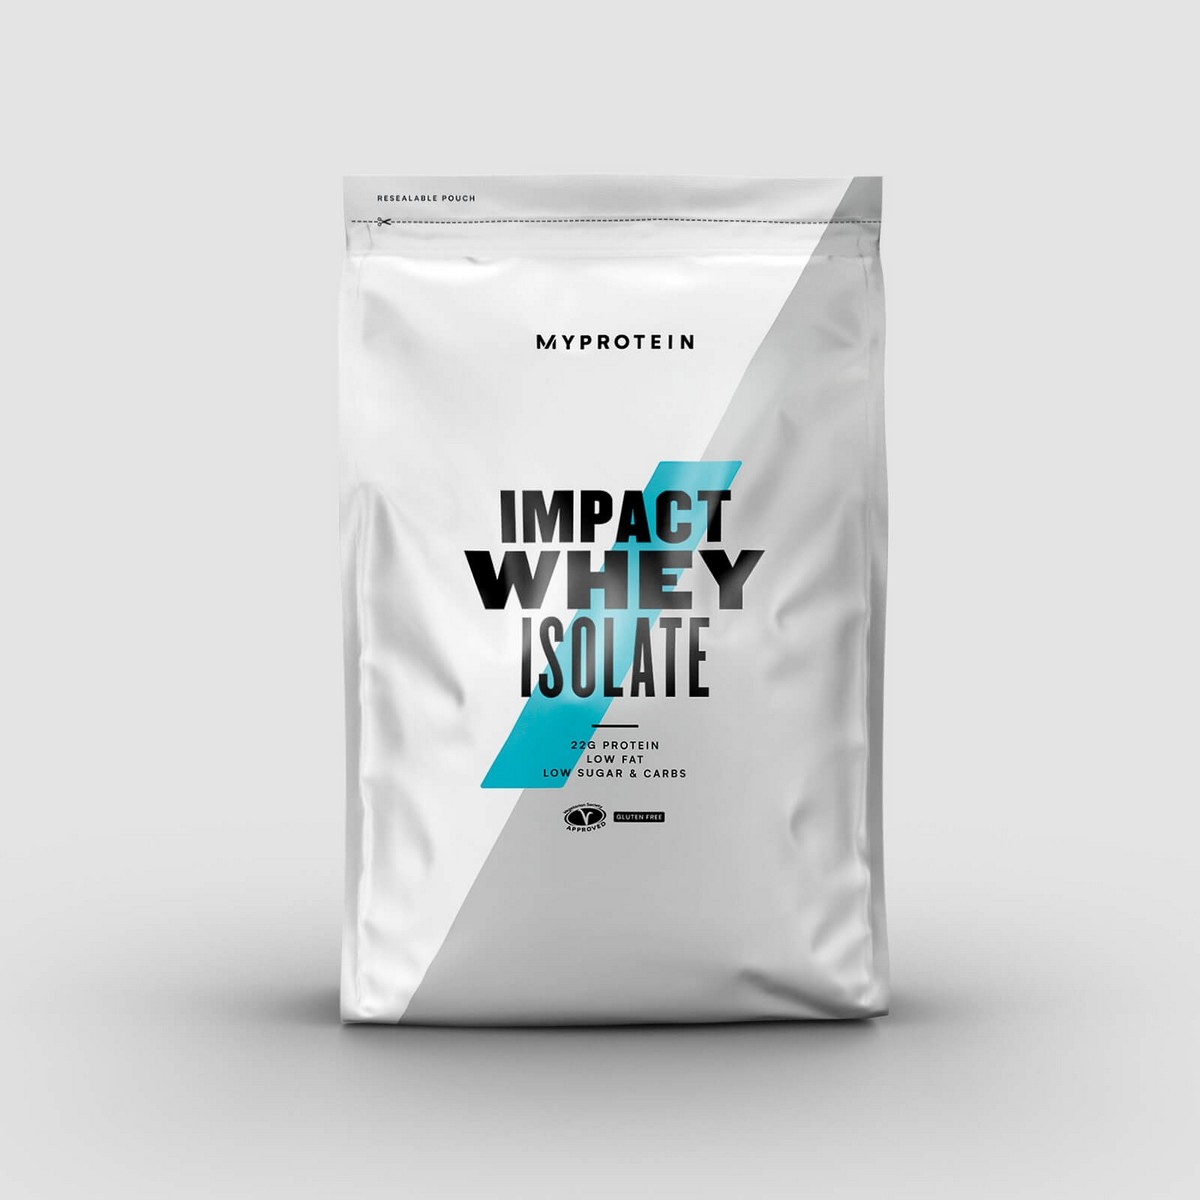 My Protein Impact Whey Isolate